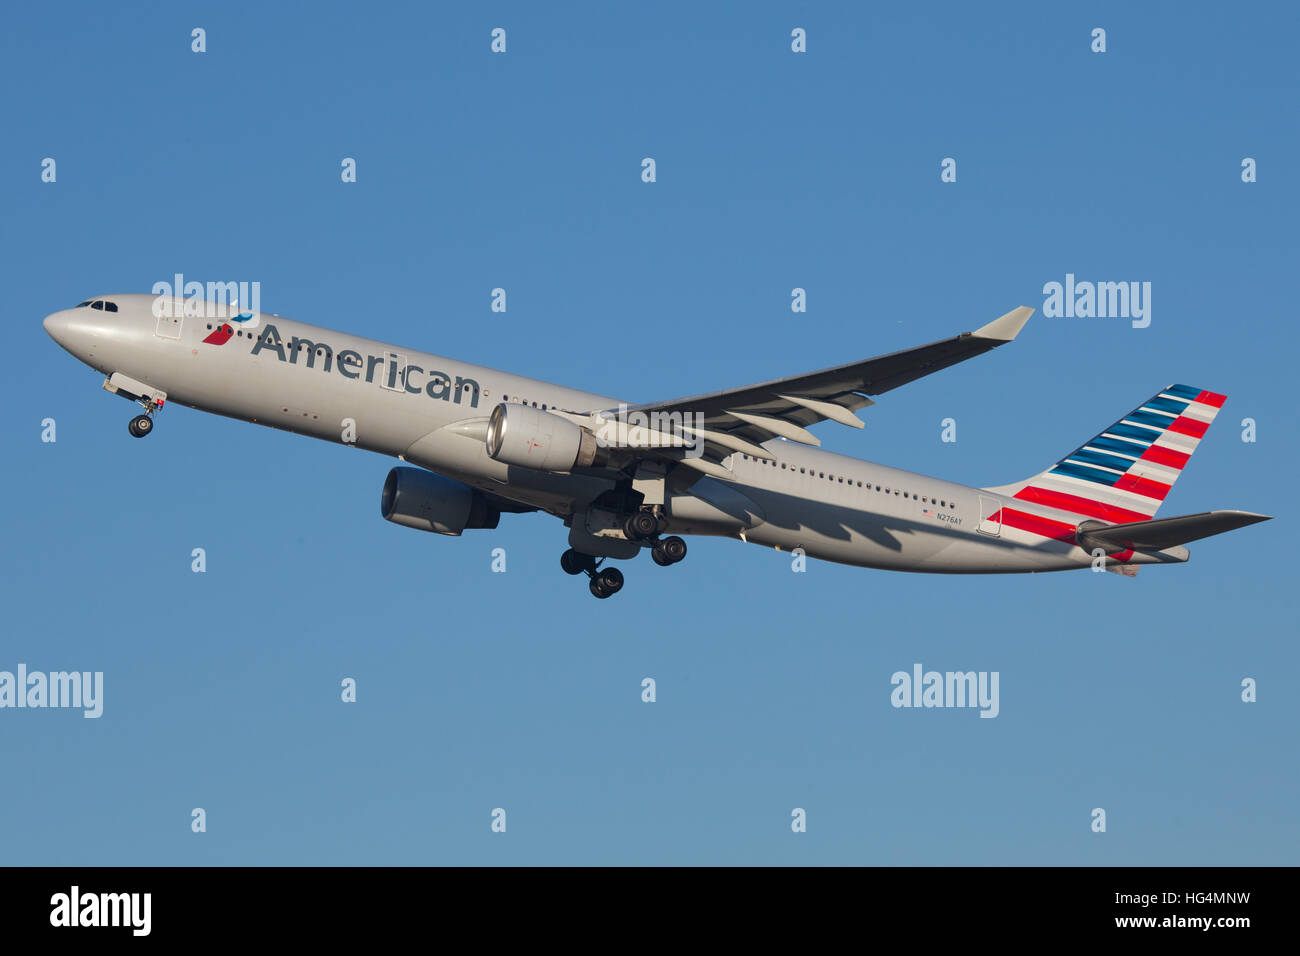 American Airlines Airbus A330 Stock Photo